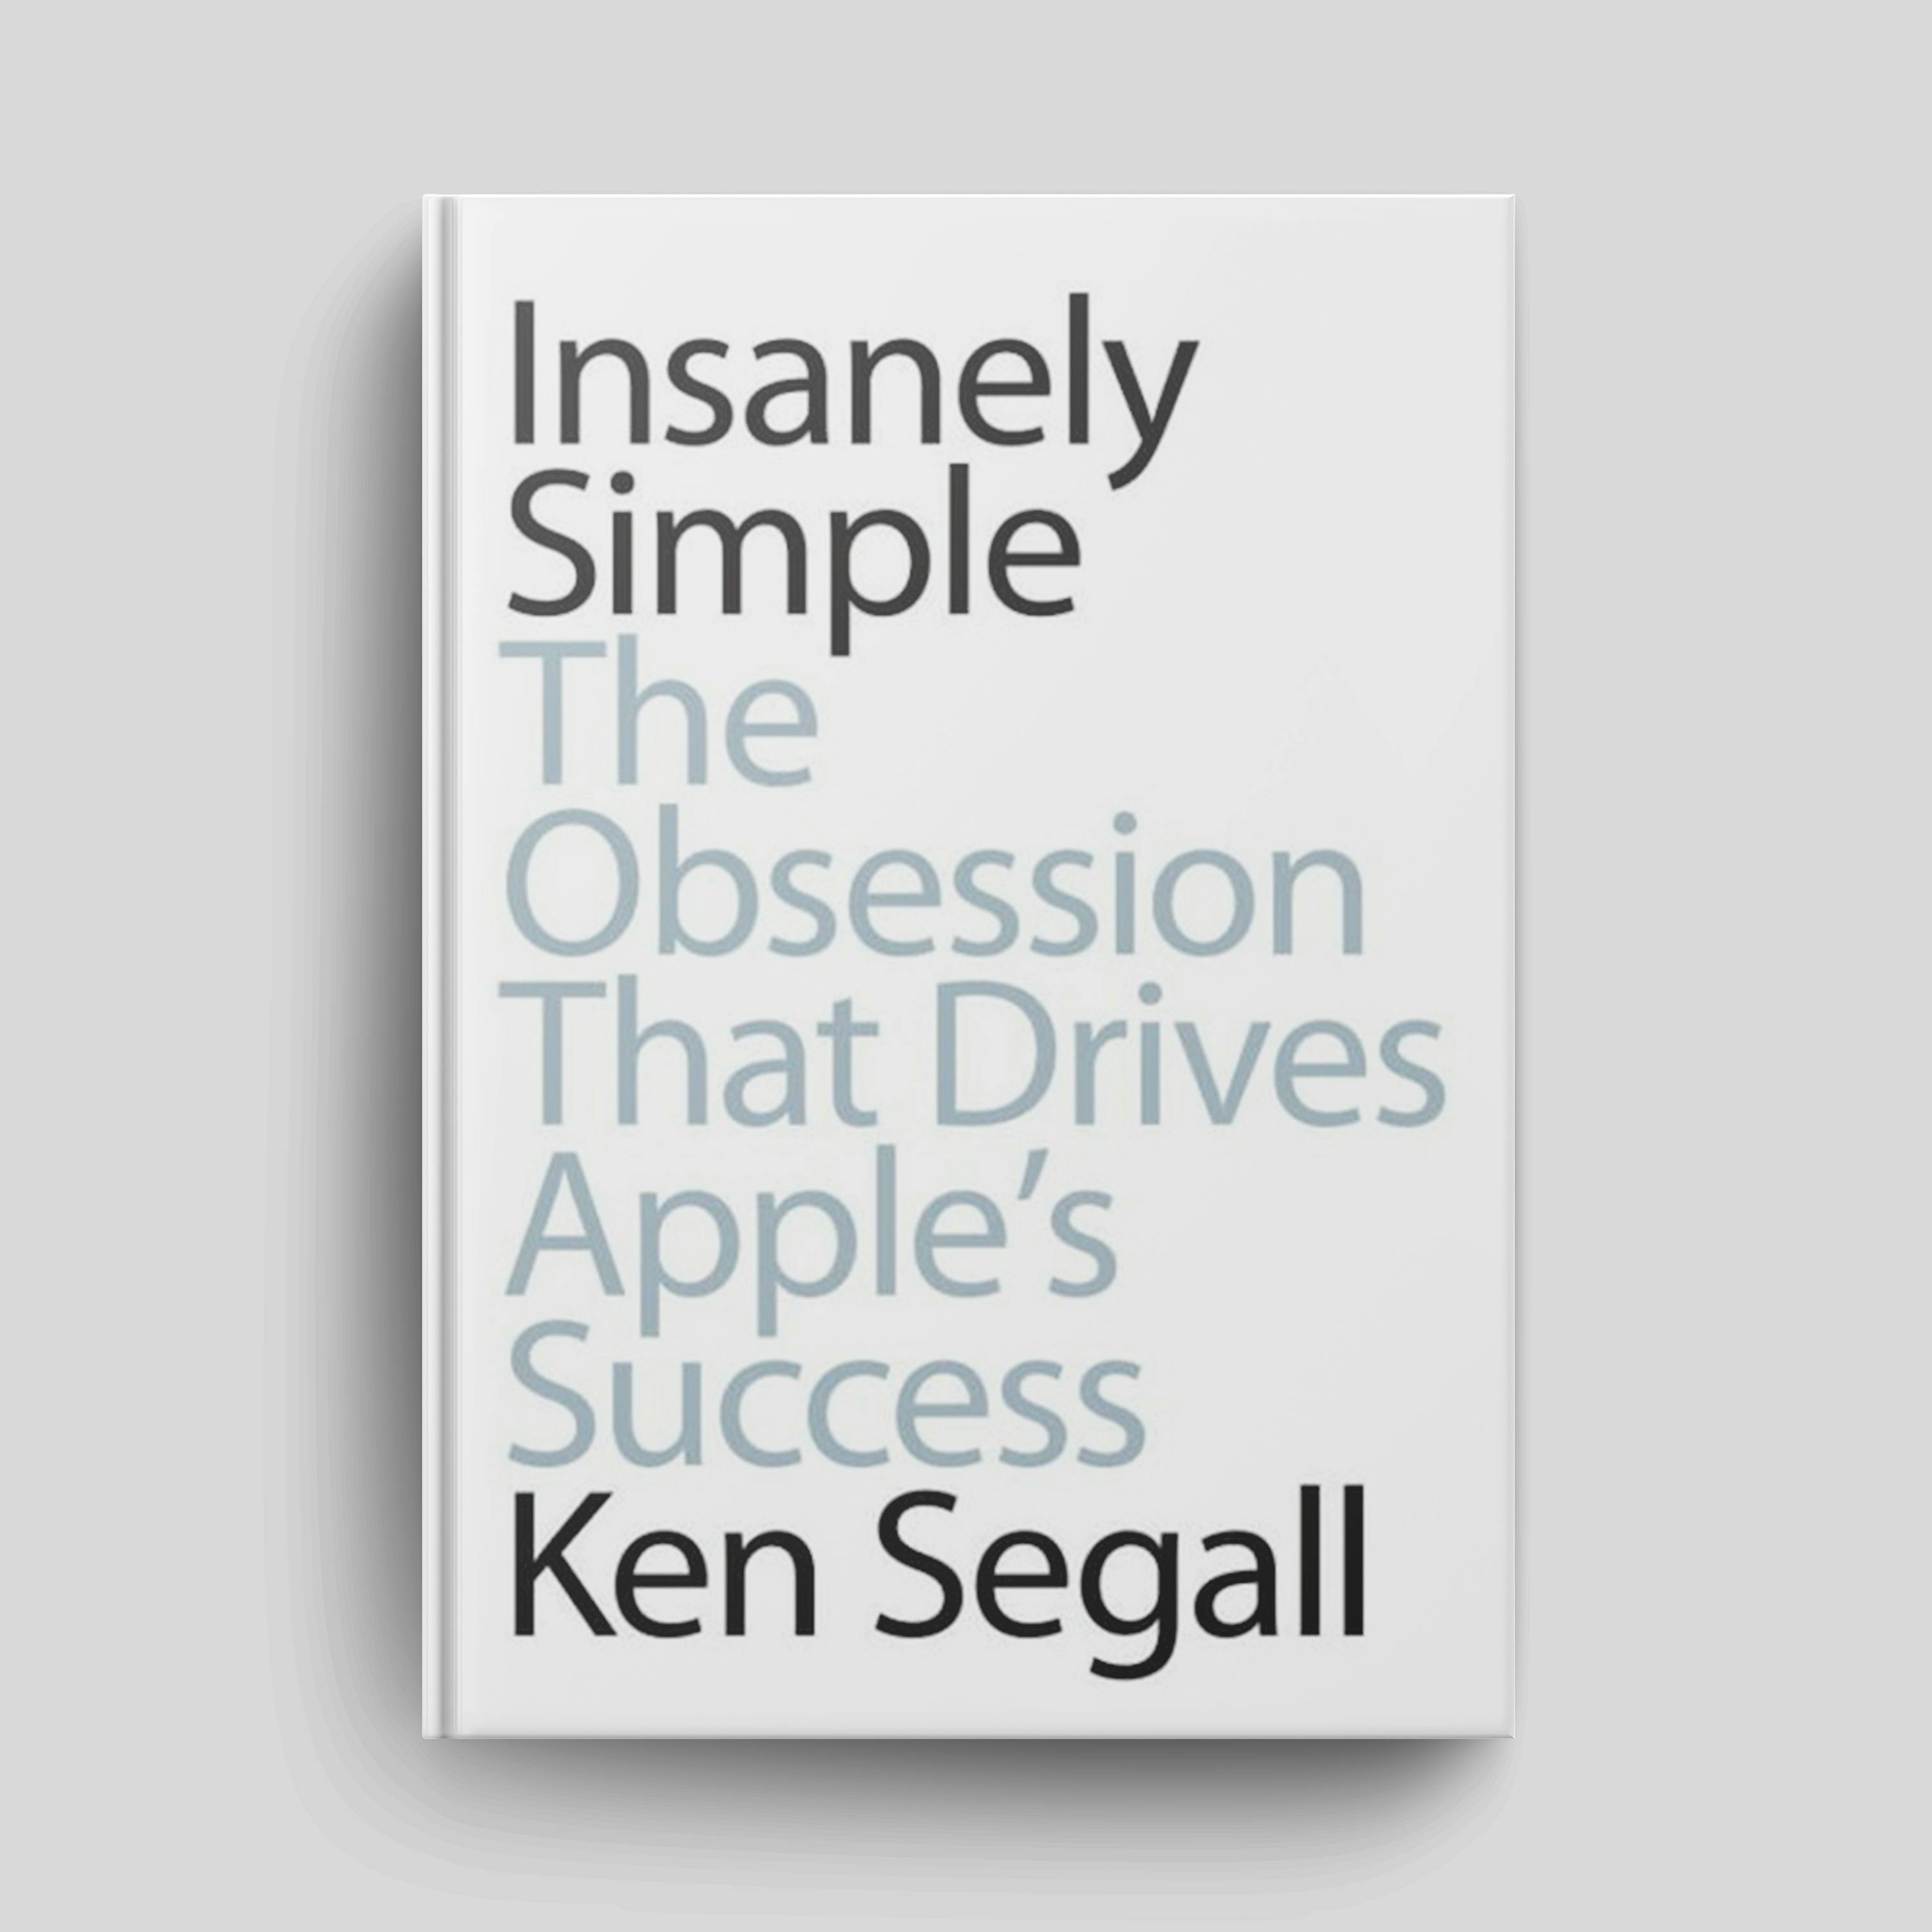 Trailer - Book: (Part 1) "Insanely Simple: The Obsession That Drives Apple's Success" | Episode #174 (Part 1 of 2)